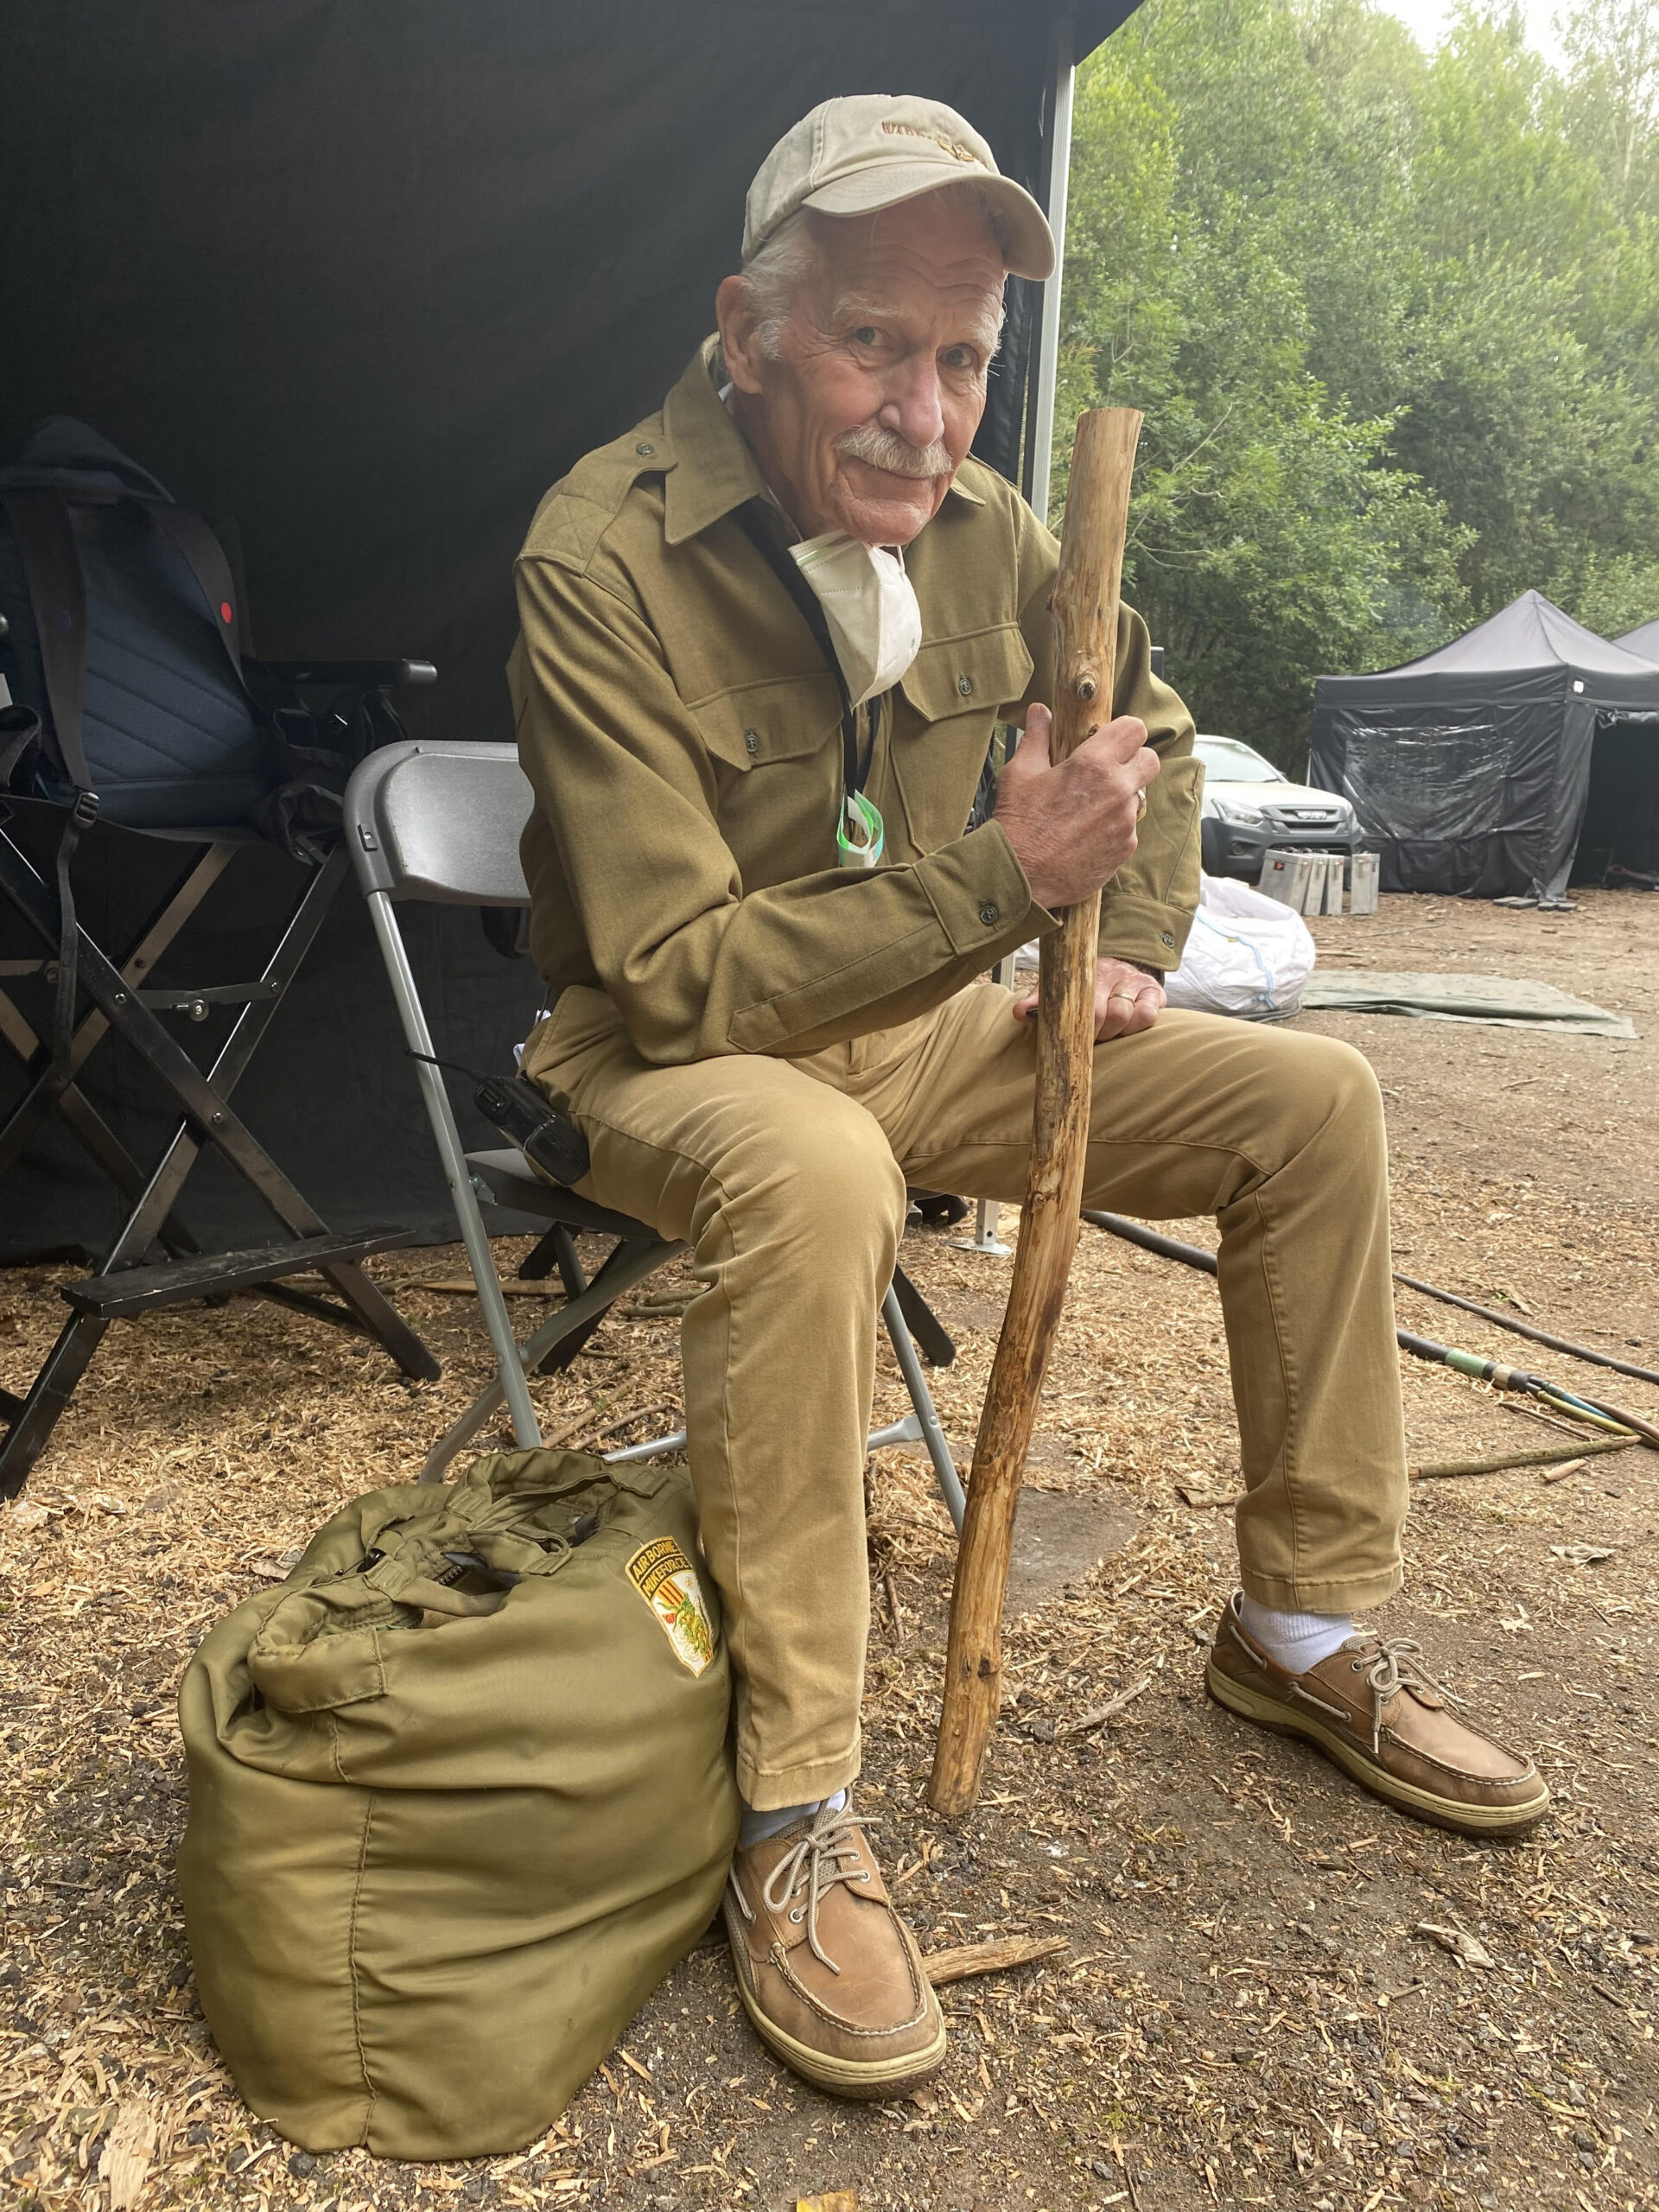 Dye is on set taking a moment. Photo courtesy of Capt Dye.